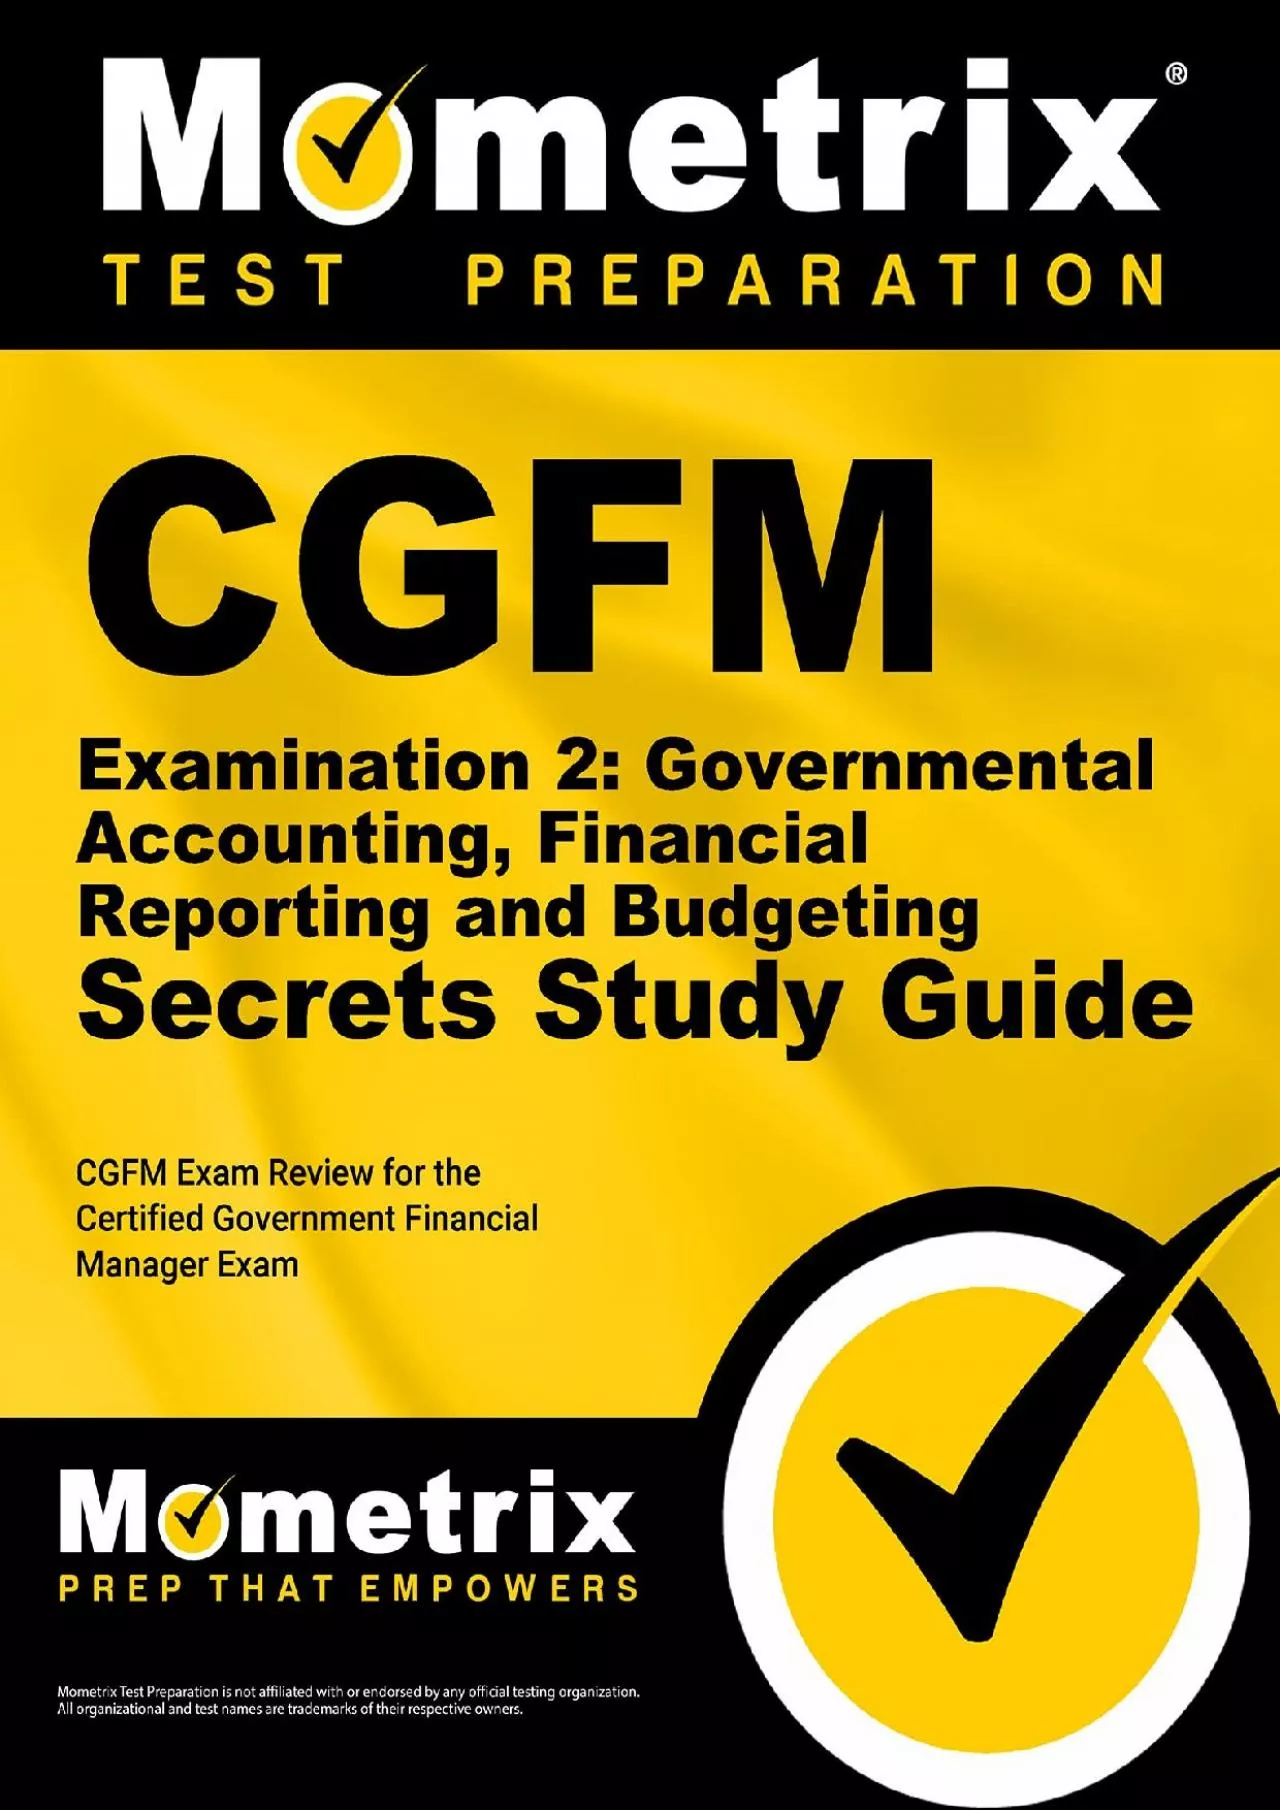 CGFM Examination 2: Governmental Accounting Financial Reporting and Budgeting Secrets